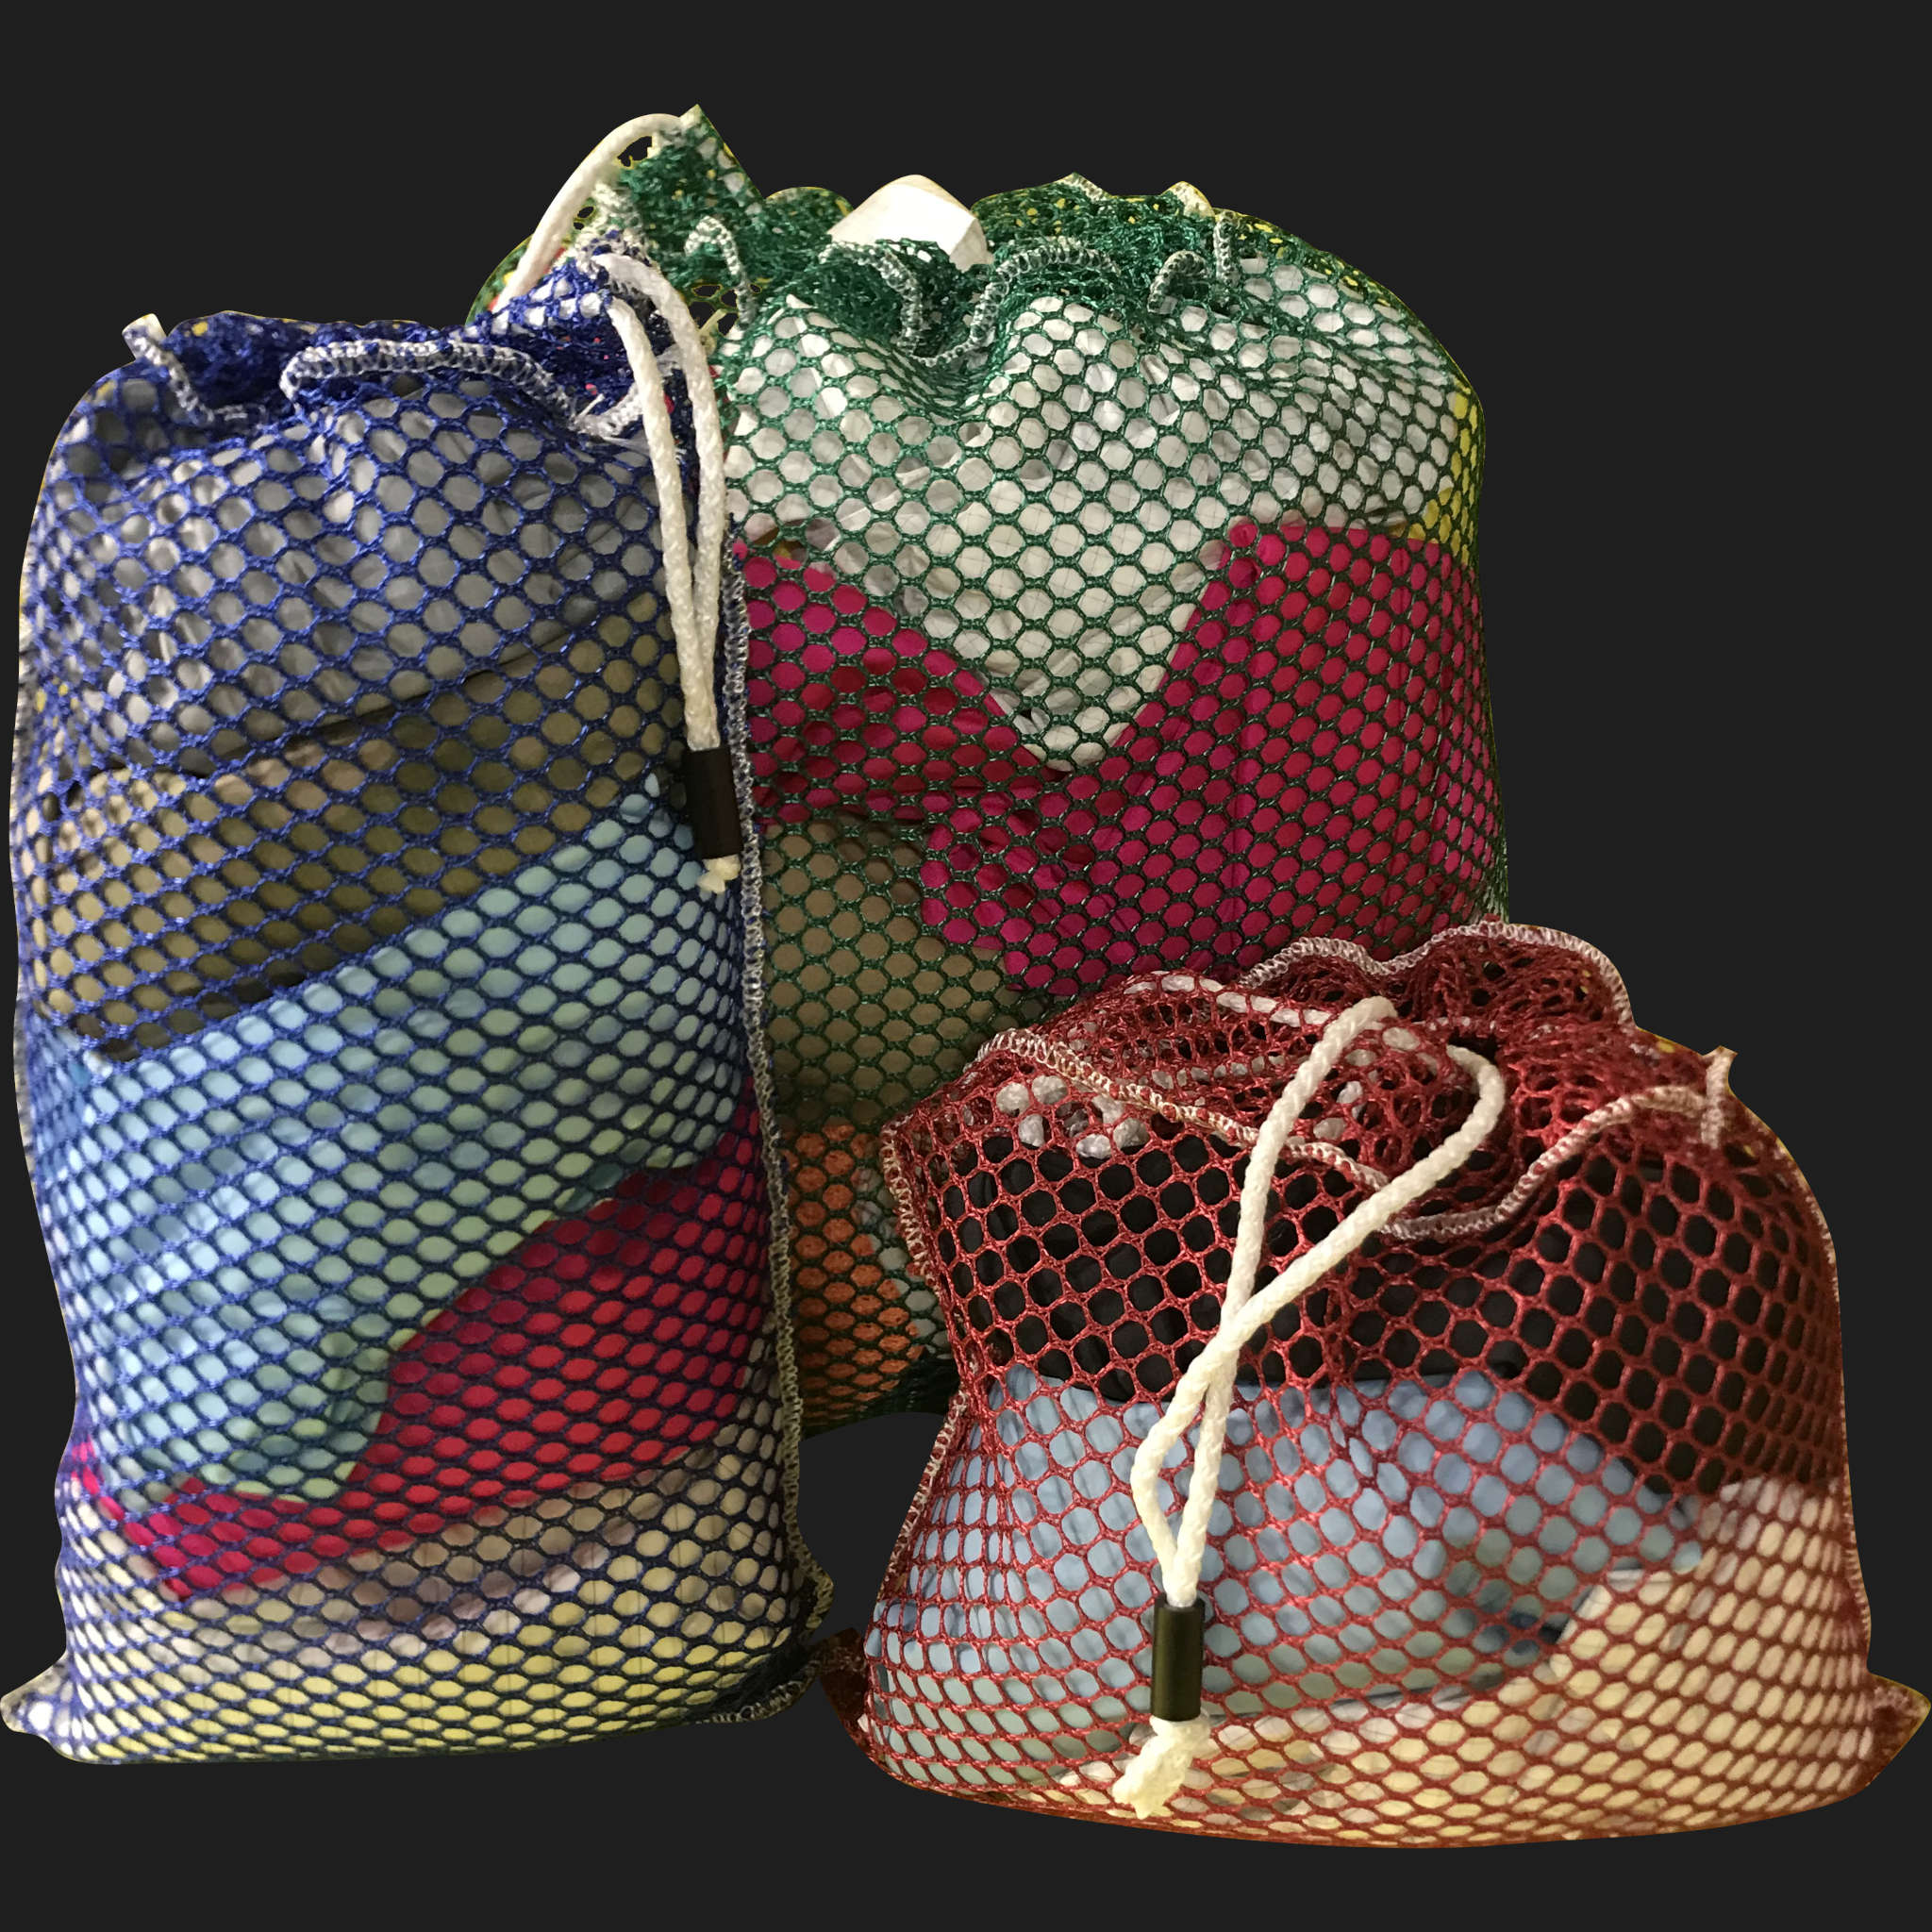 44" x 60" Customized Mesh-Net-Laundry Bags Heavy Duty with Cord and barrellock closure